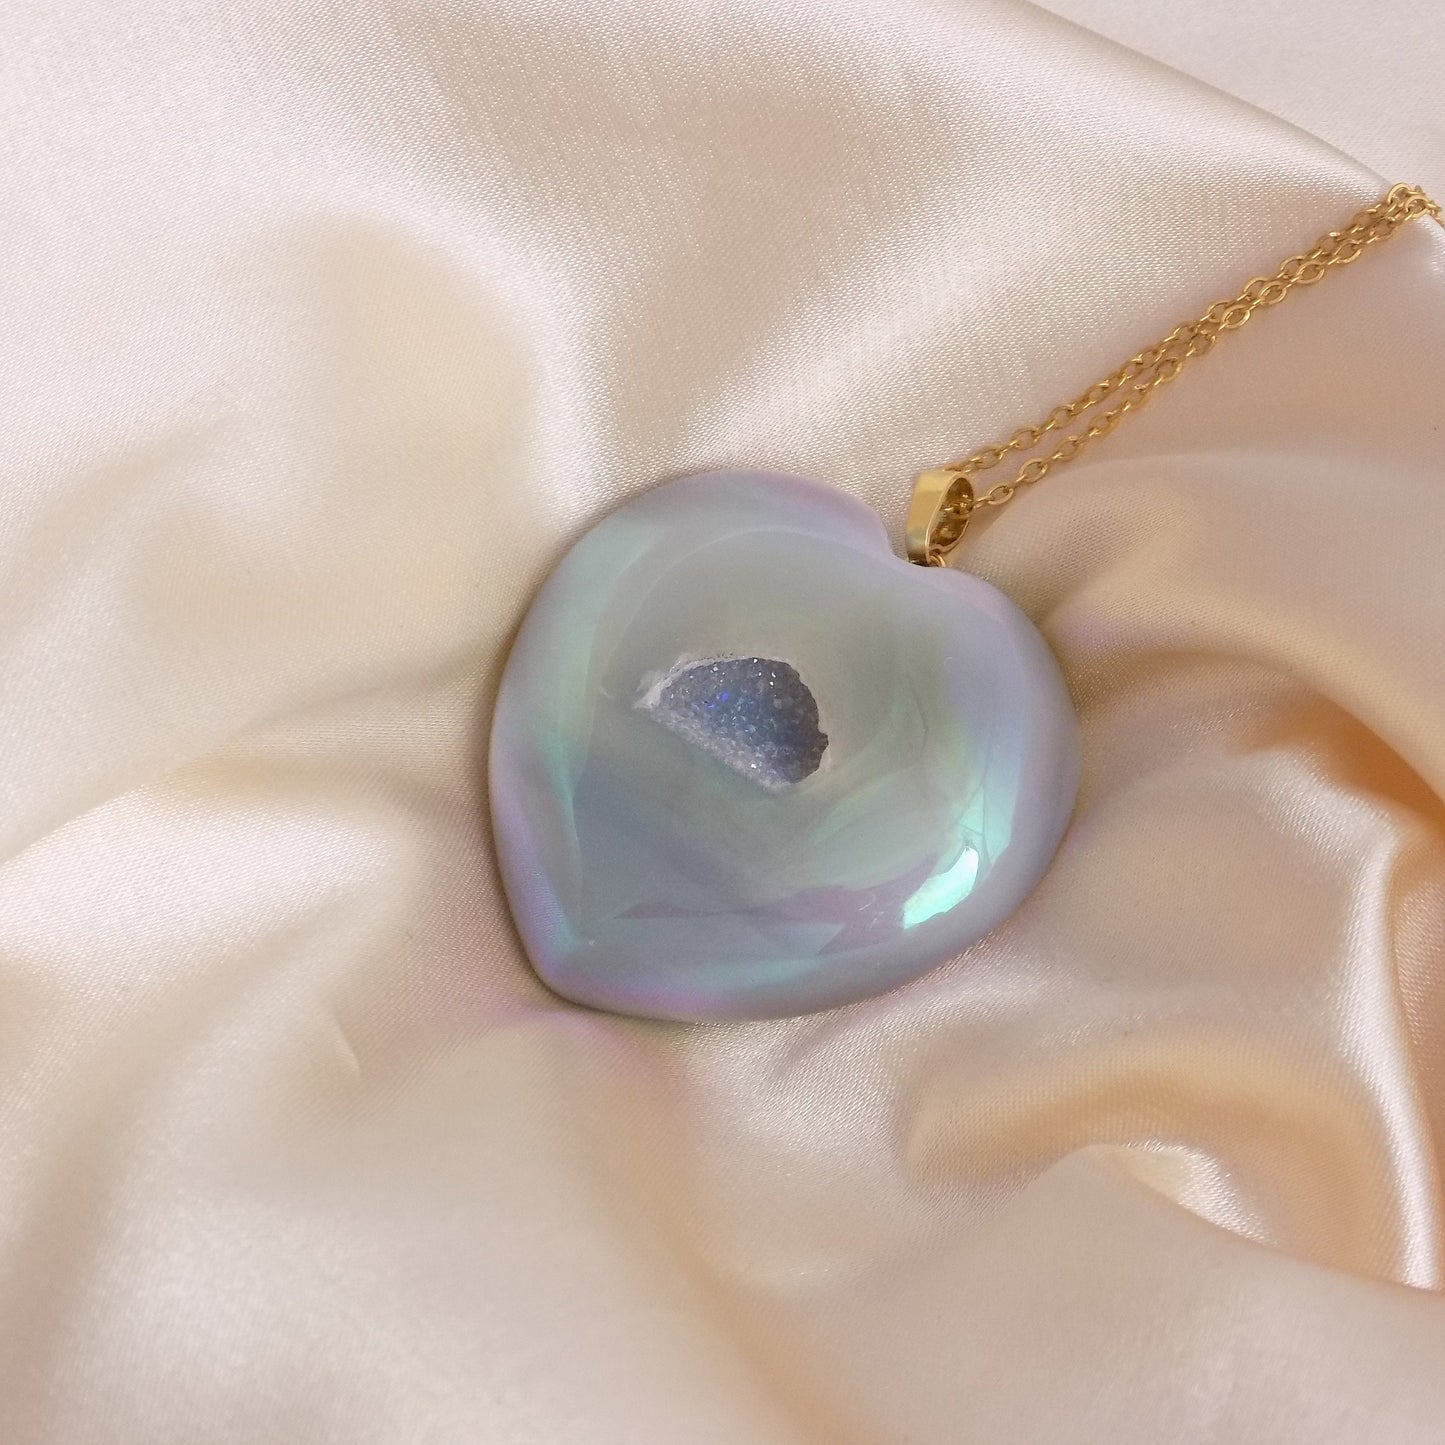 Aura Quartz Geode Necklace Gold, Unique Iridescent Heart Crystal Jewelry Boho, Gift For Her, M7-65